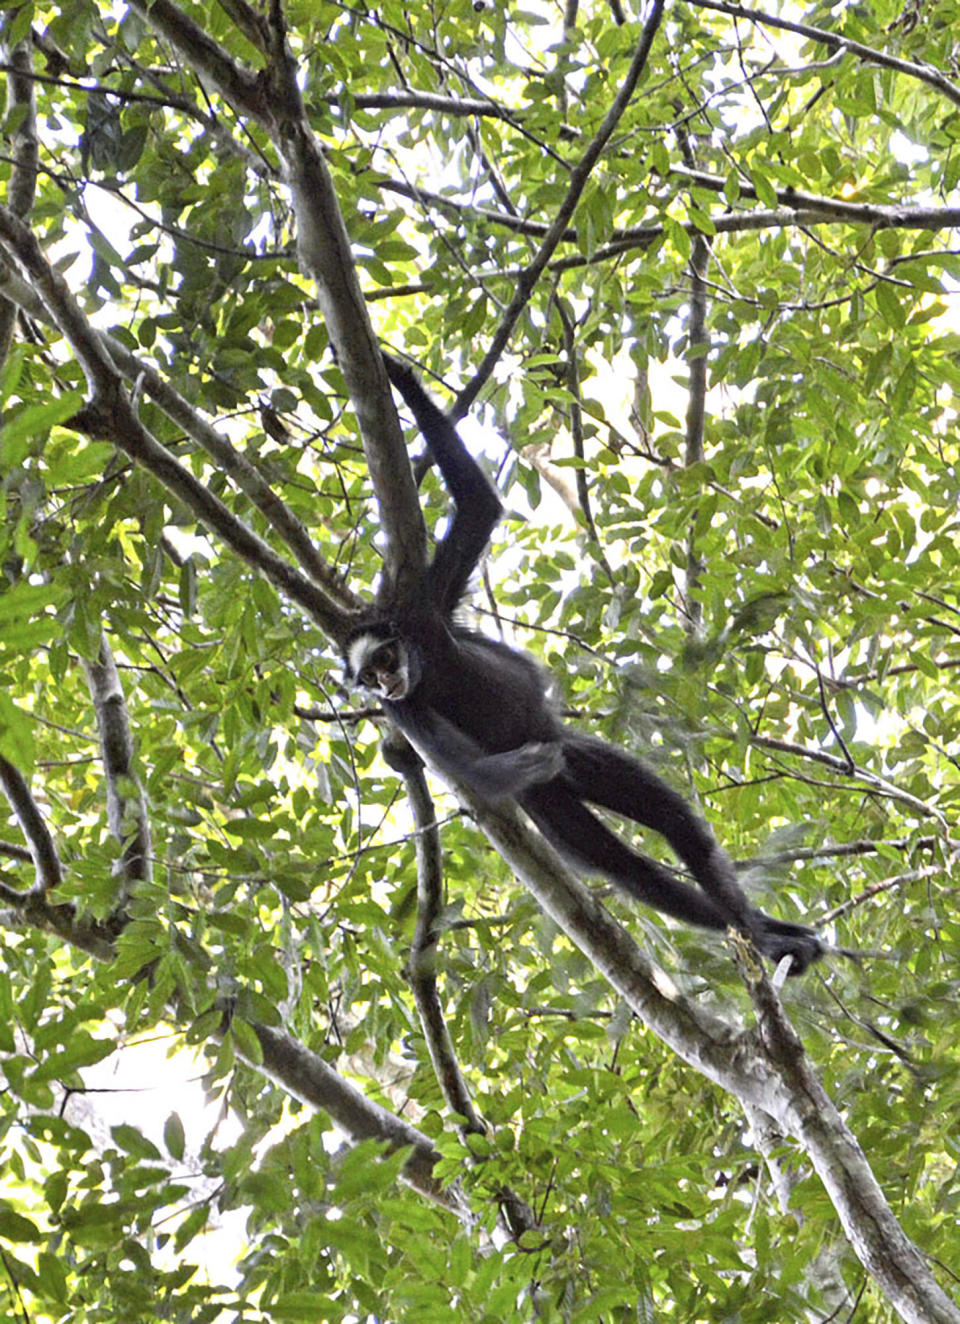 In this July 2019 photo provided by Rodrigo Vargas, endemic white-fronted spider monkey (Ateles marginatus), an endangered species due to habitat loss, climbs a branch in Cristalino II State Park in the state of Mato Grosso, in Brazil. In a move that shocked environmentalists, the government of Brazil's third-largest state gave up on a legal battle to protect the state park located in one of the Amazon's most biodiverse areas. Now the park will be officially dissolved, its press office confirmed to The Associated Press. (Rodrigo Vargas via AP)